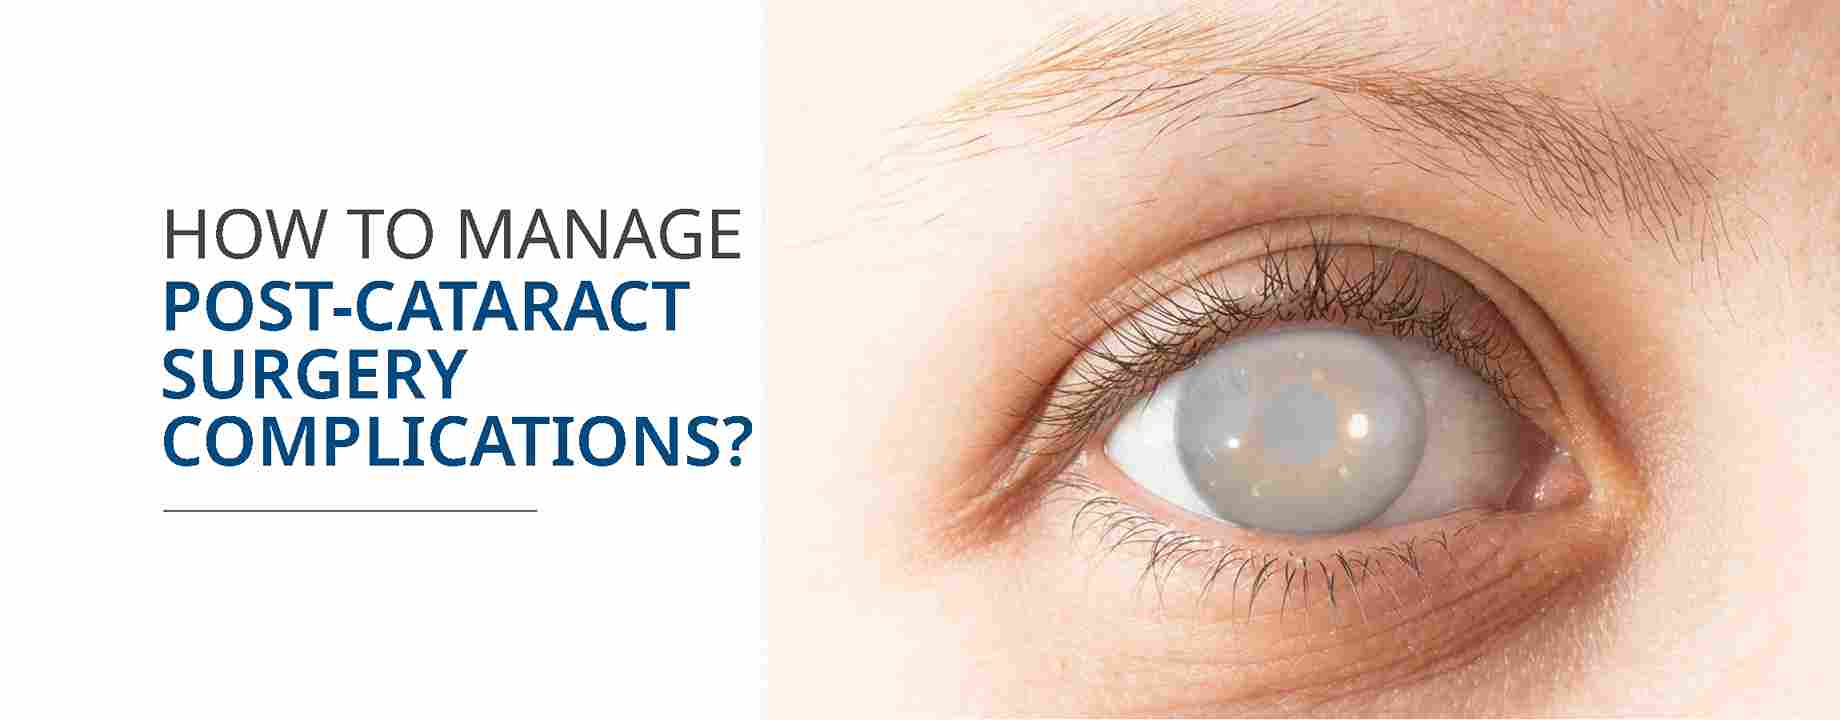 Cataract Surgery and Your Vision